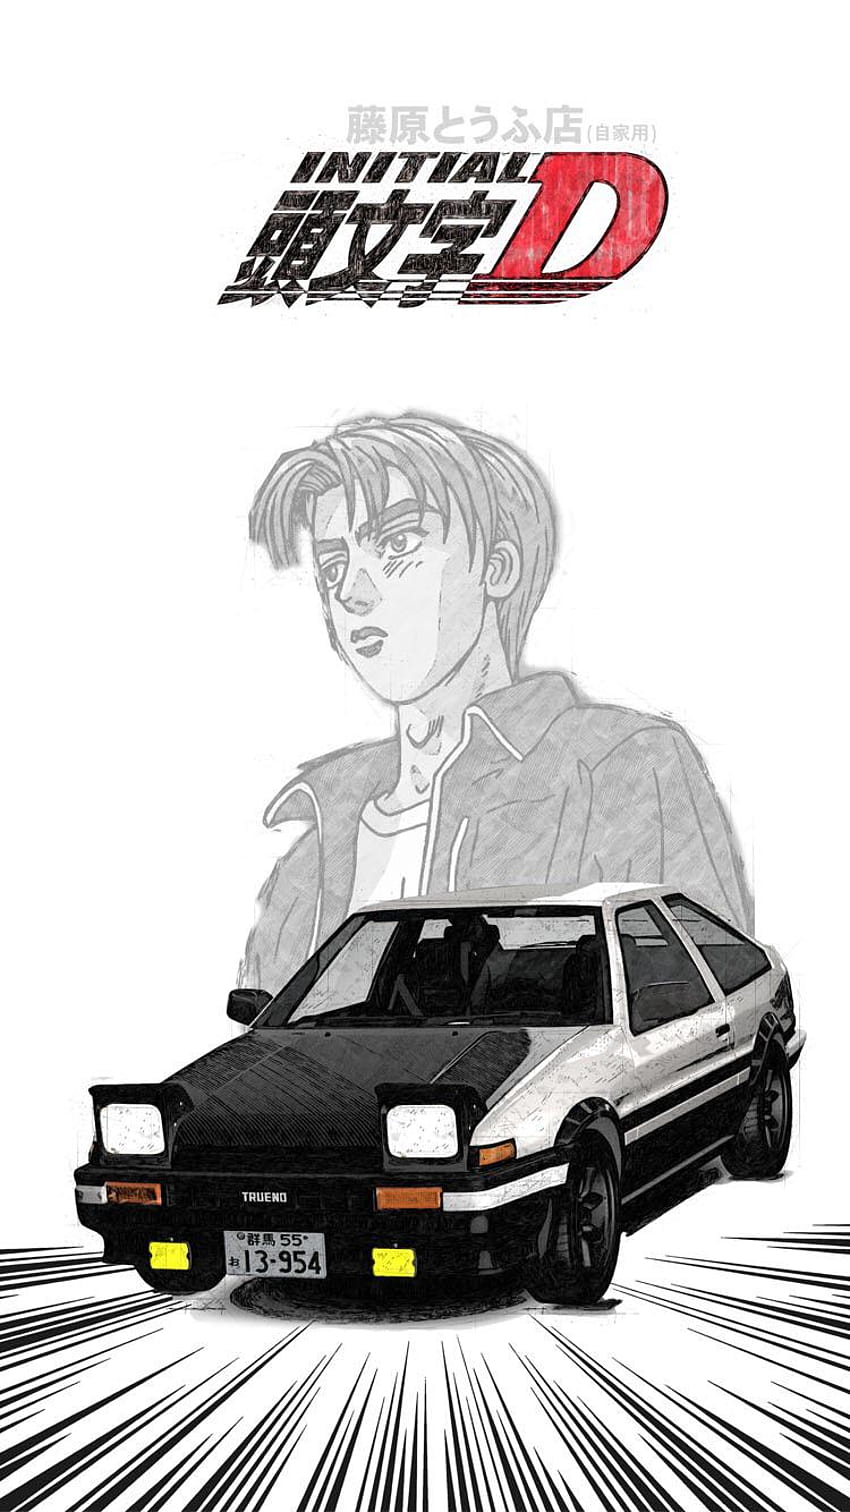 As promised, here's some of my initial D art, initial d toyota trueno HD phone wallpaper